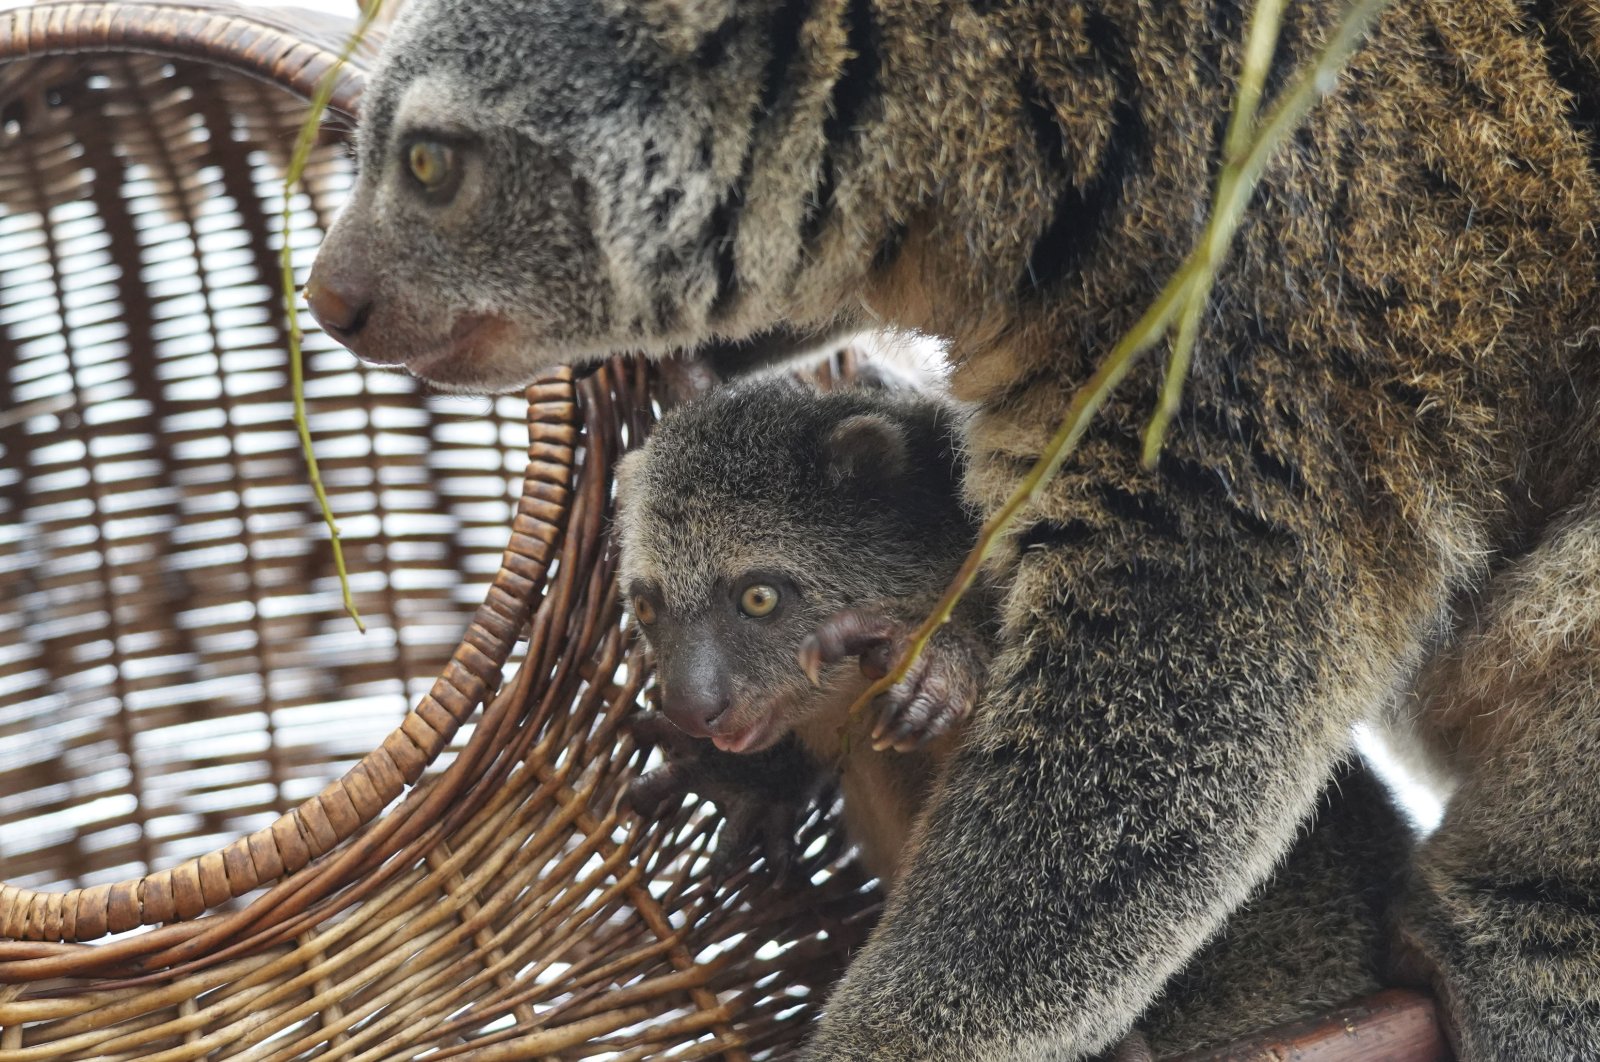 A baby of the highly endangered Indonesian cuscus bear with its mother Duzy at the Wroclaw Zoo in Wroclaw, Poland on Feb. 16, 2021. (AP Photo)